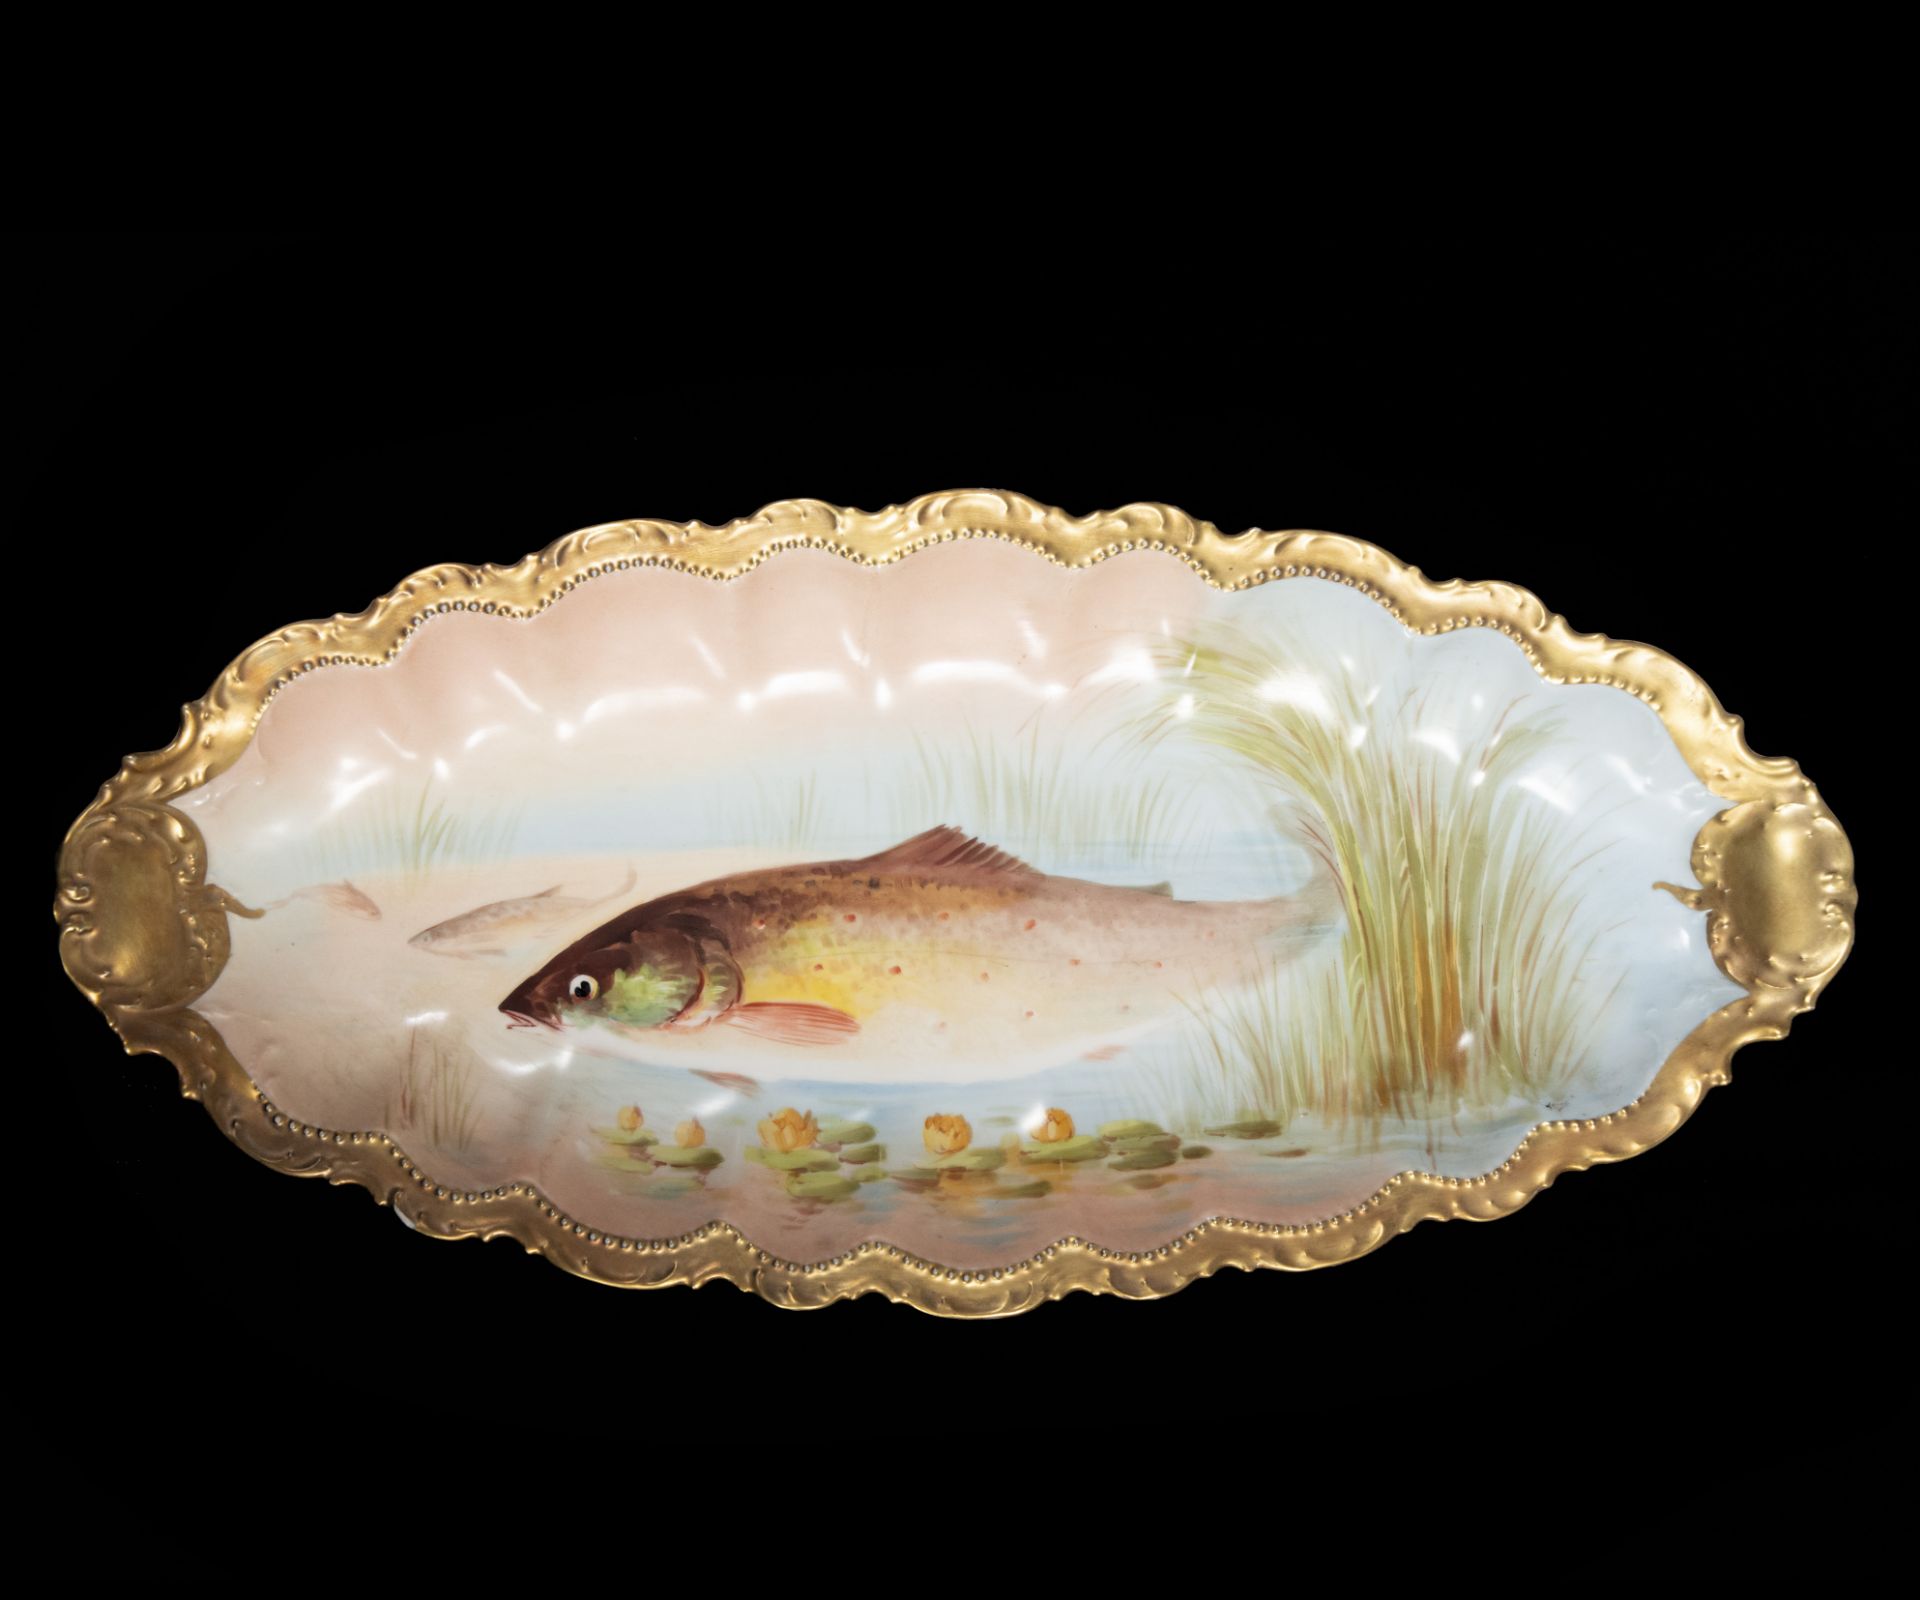 19th Century Limoges Porcelain Fish Dinnerware Set by the Count of Artois, 19th Century - Image 10 of 12